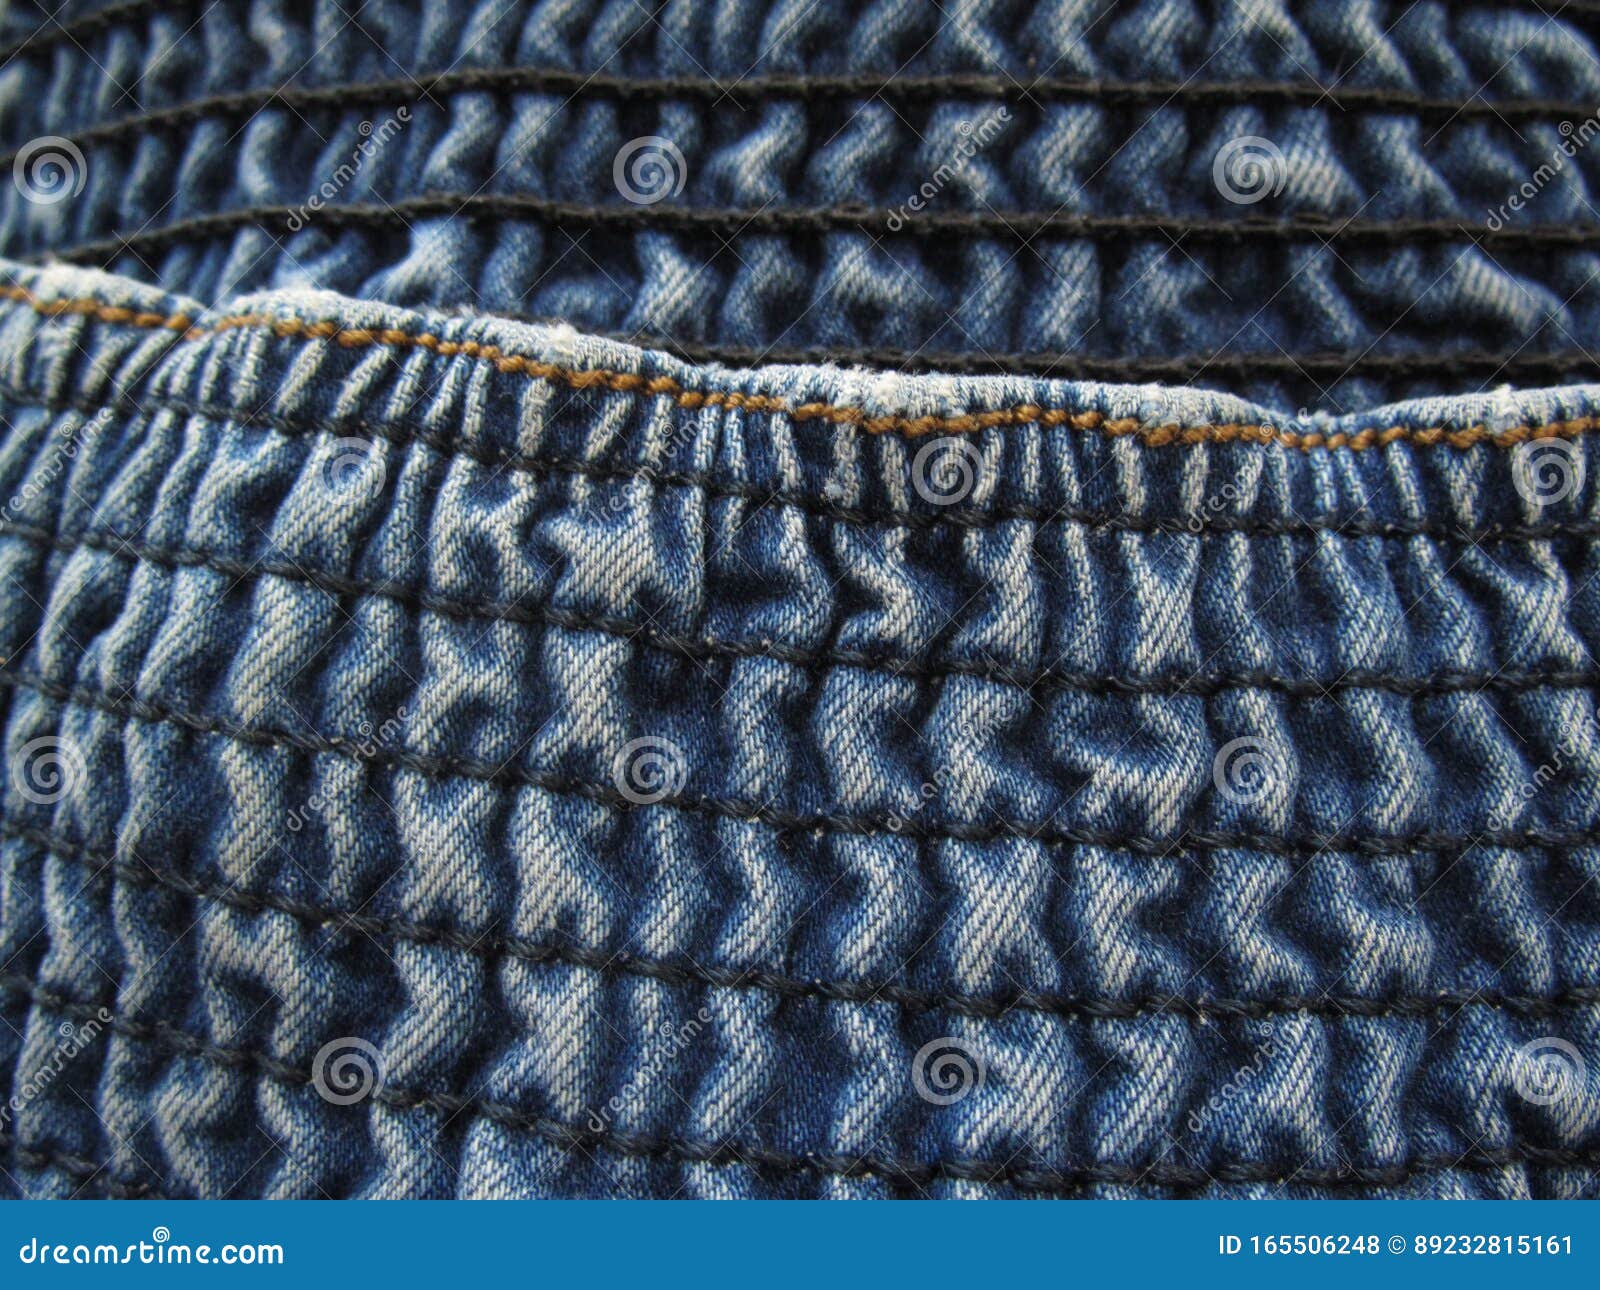 Large Elastic Waistband in Jeans. Denim Texture. Blue Jeans